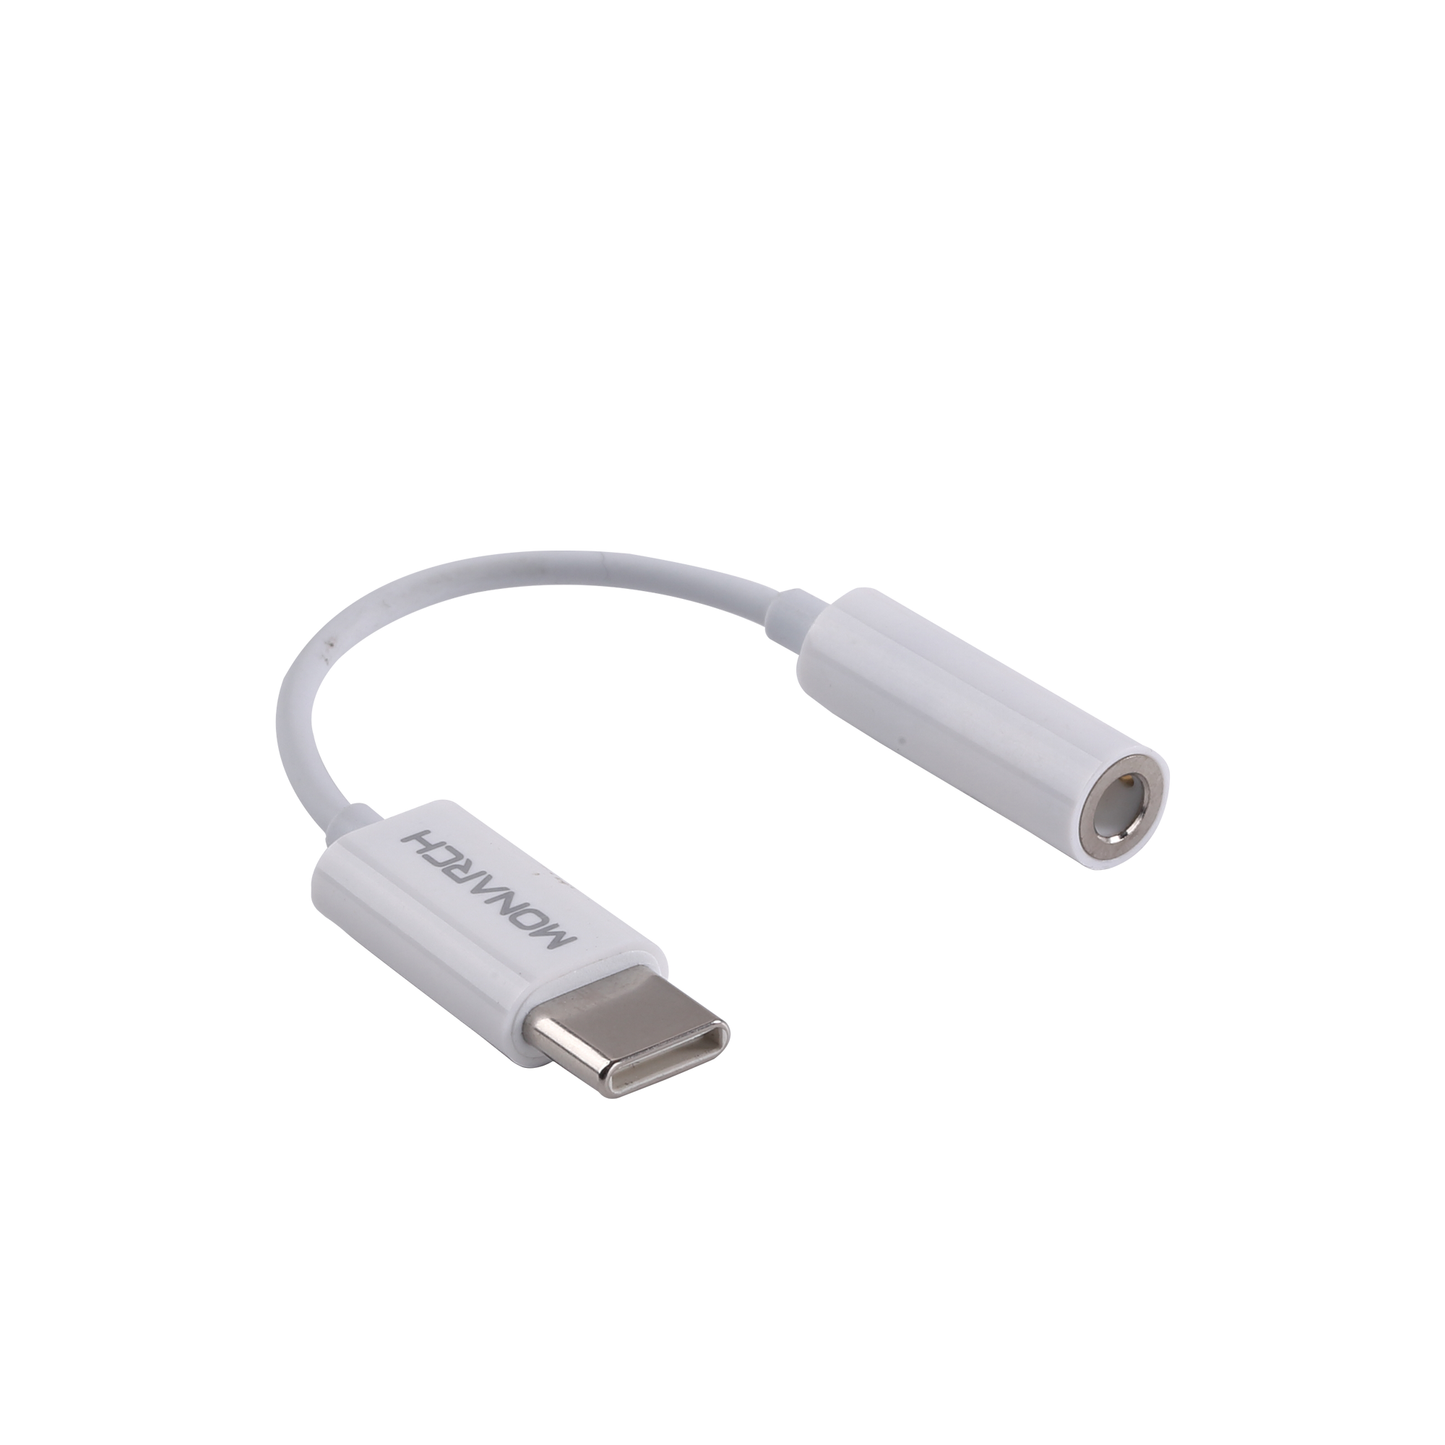 A32         USB-C to 3.5mm Audio Adapter